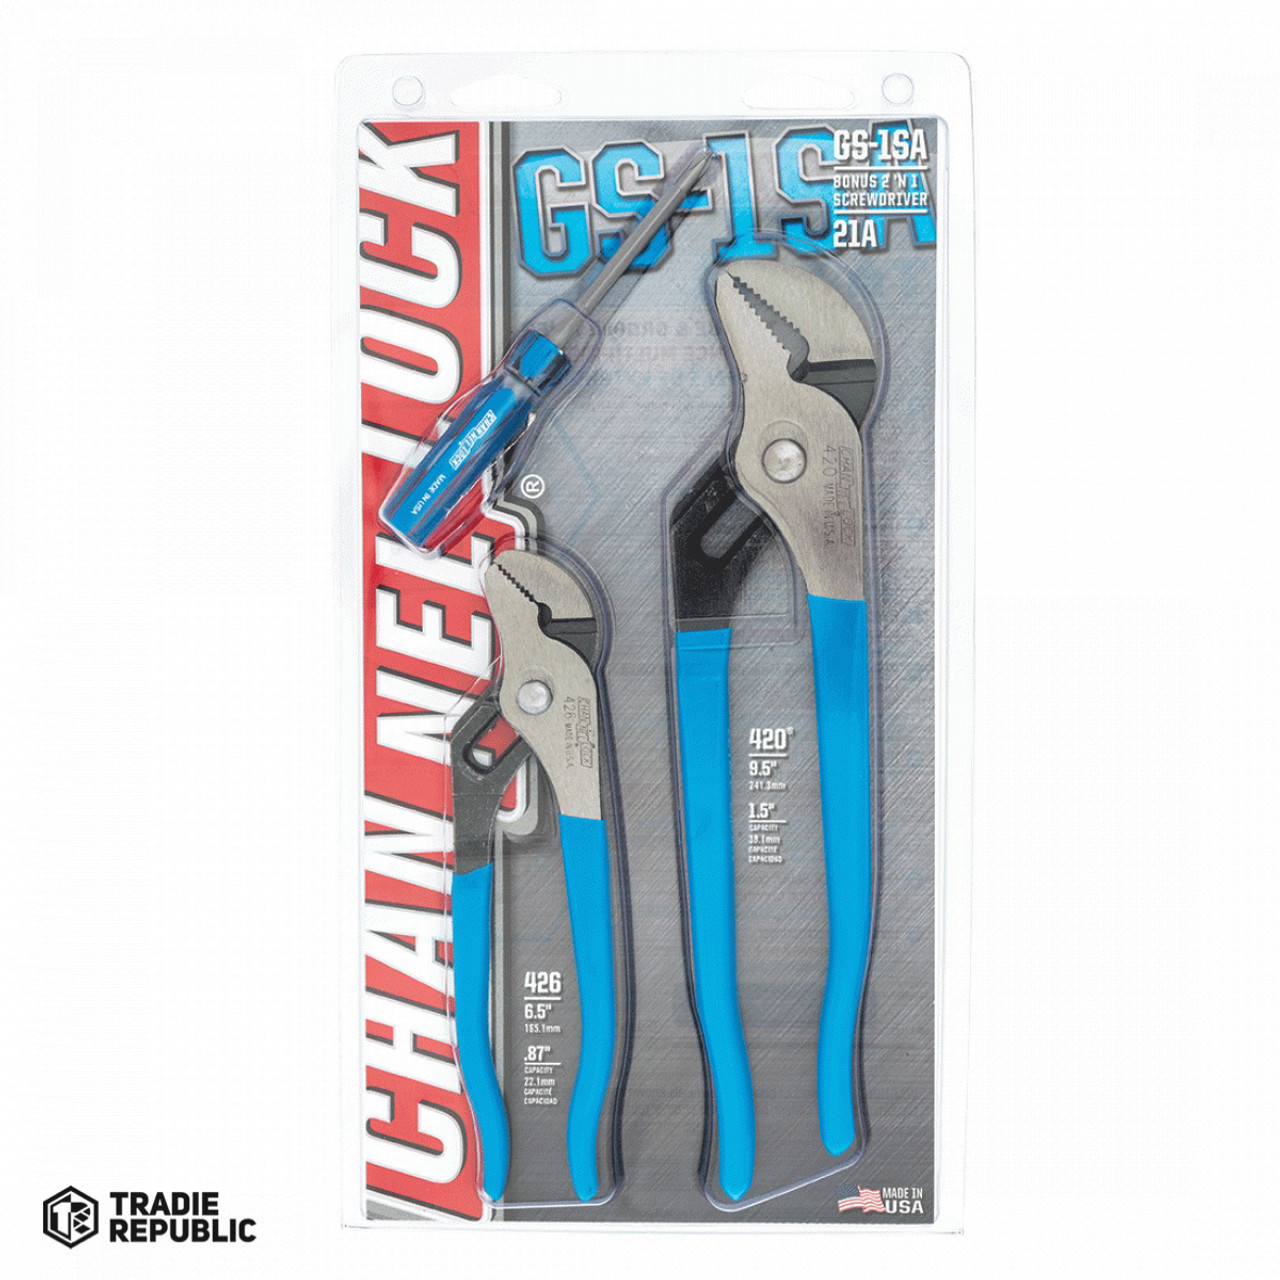 CHGS-1SA Channellock Tongue and Groove Plier Combo Set - 2Pc